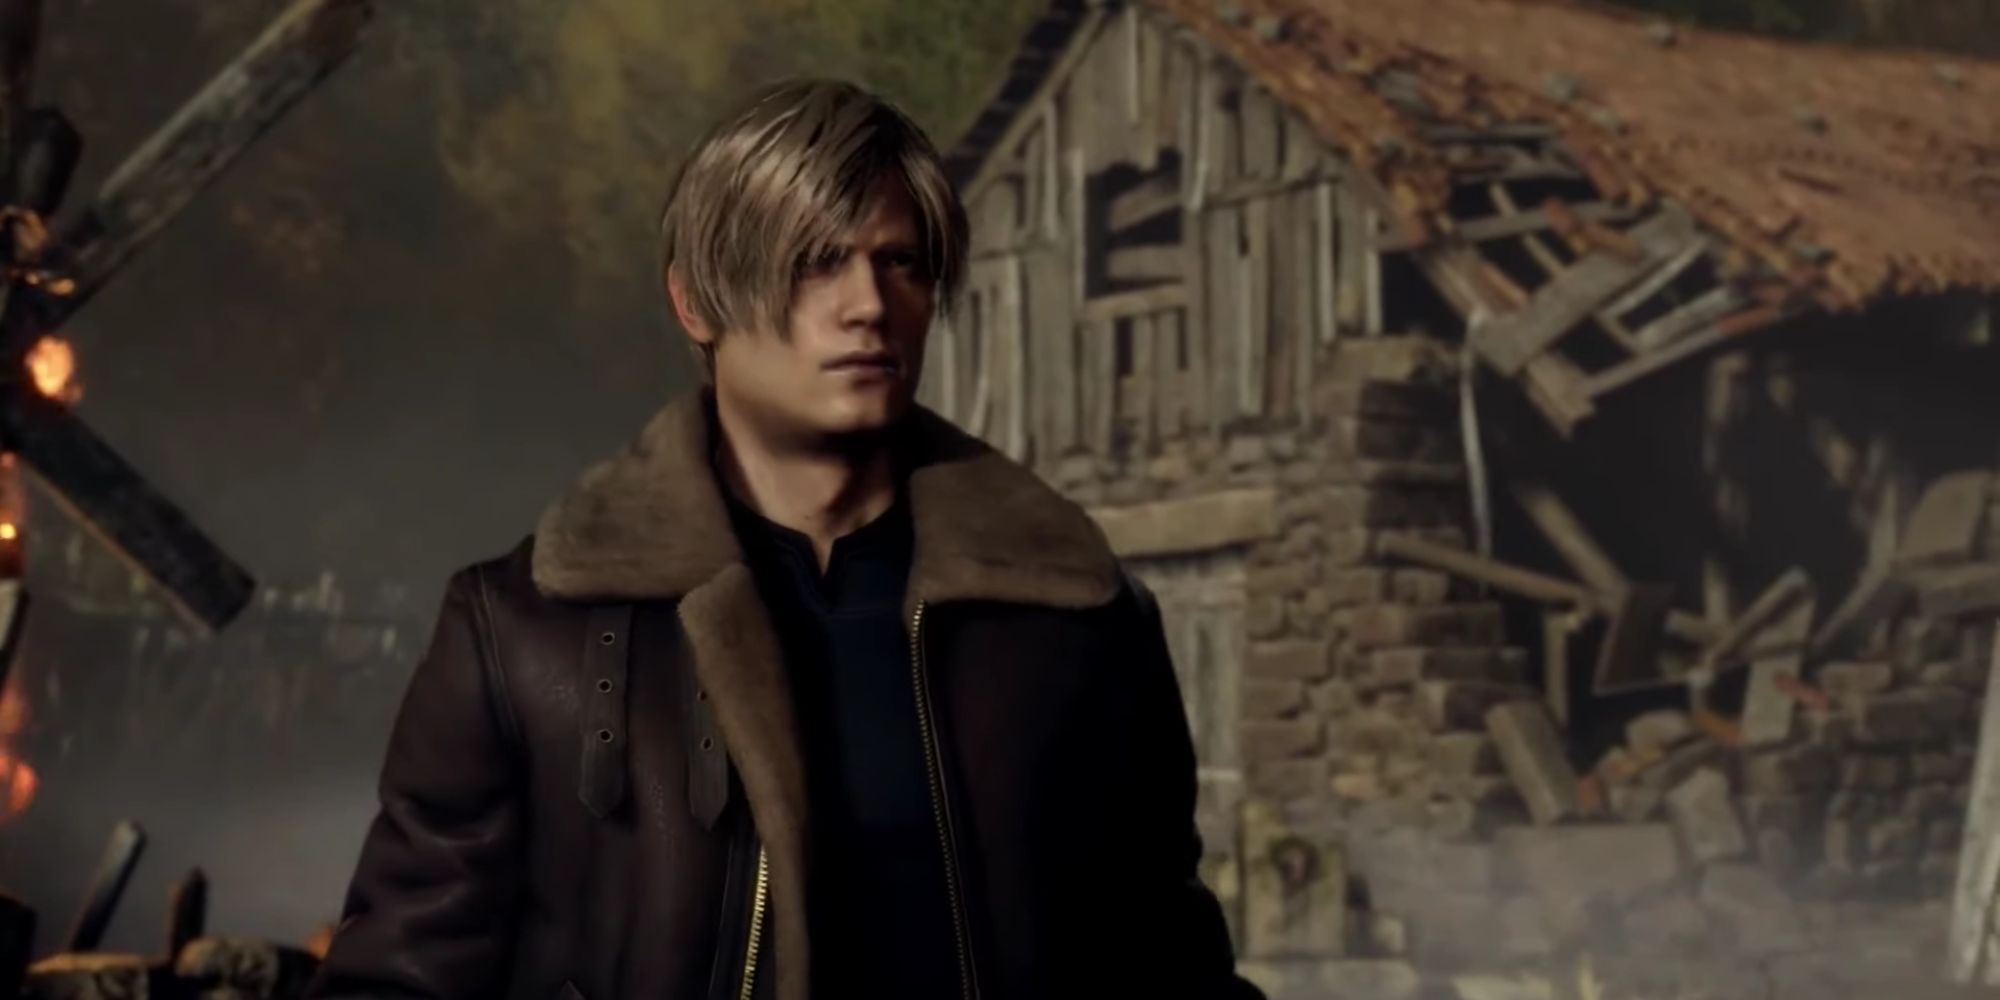 Resident Evil 4 (Remake) Review – Everyone going to bingo?